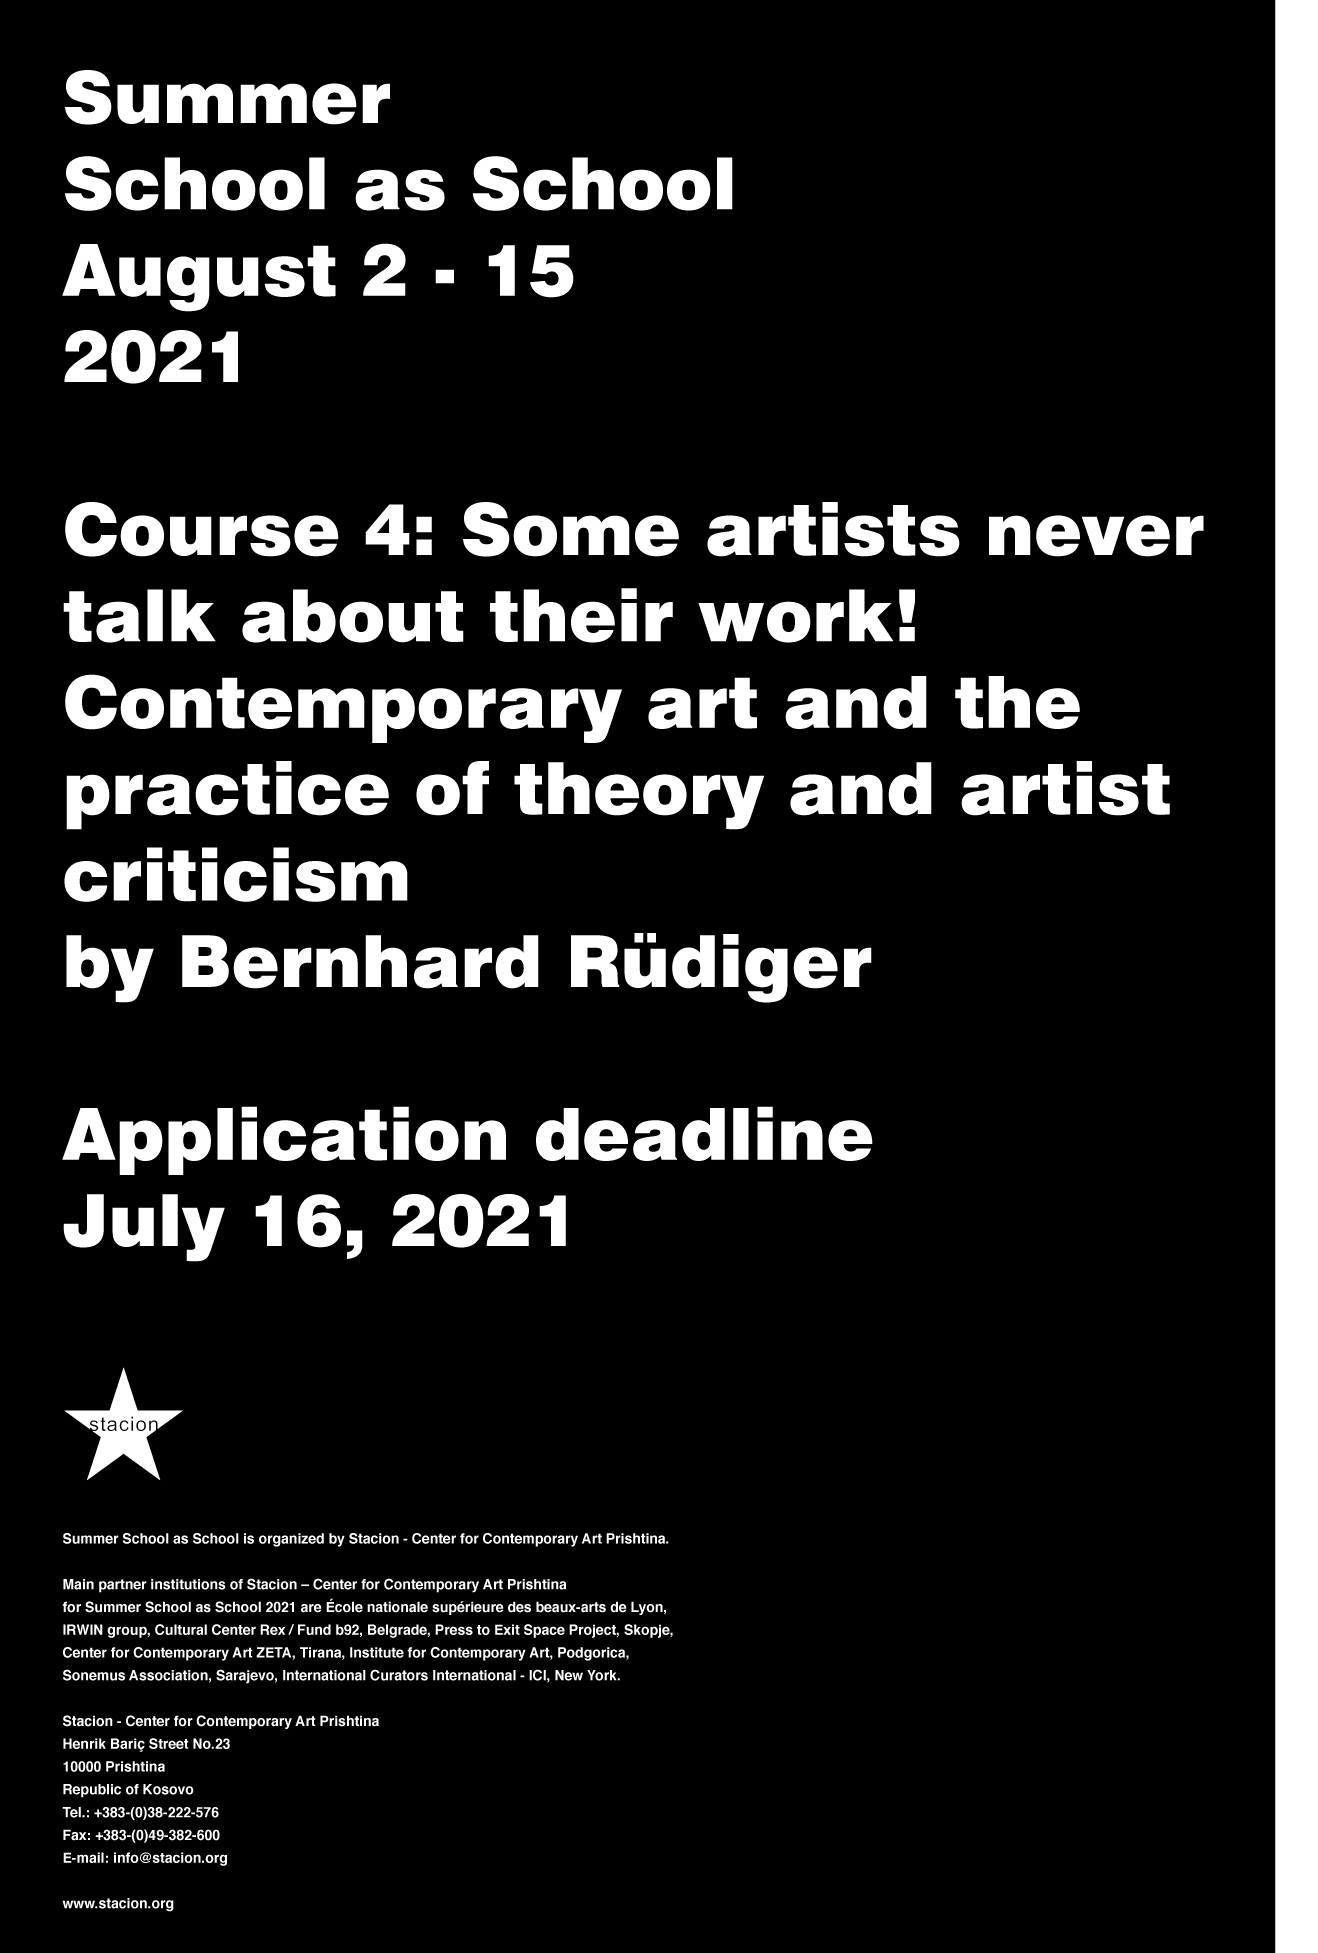 Course 4: Some artists never talk about their work! Contemporary art and the practice of theory and artist criticism